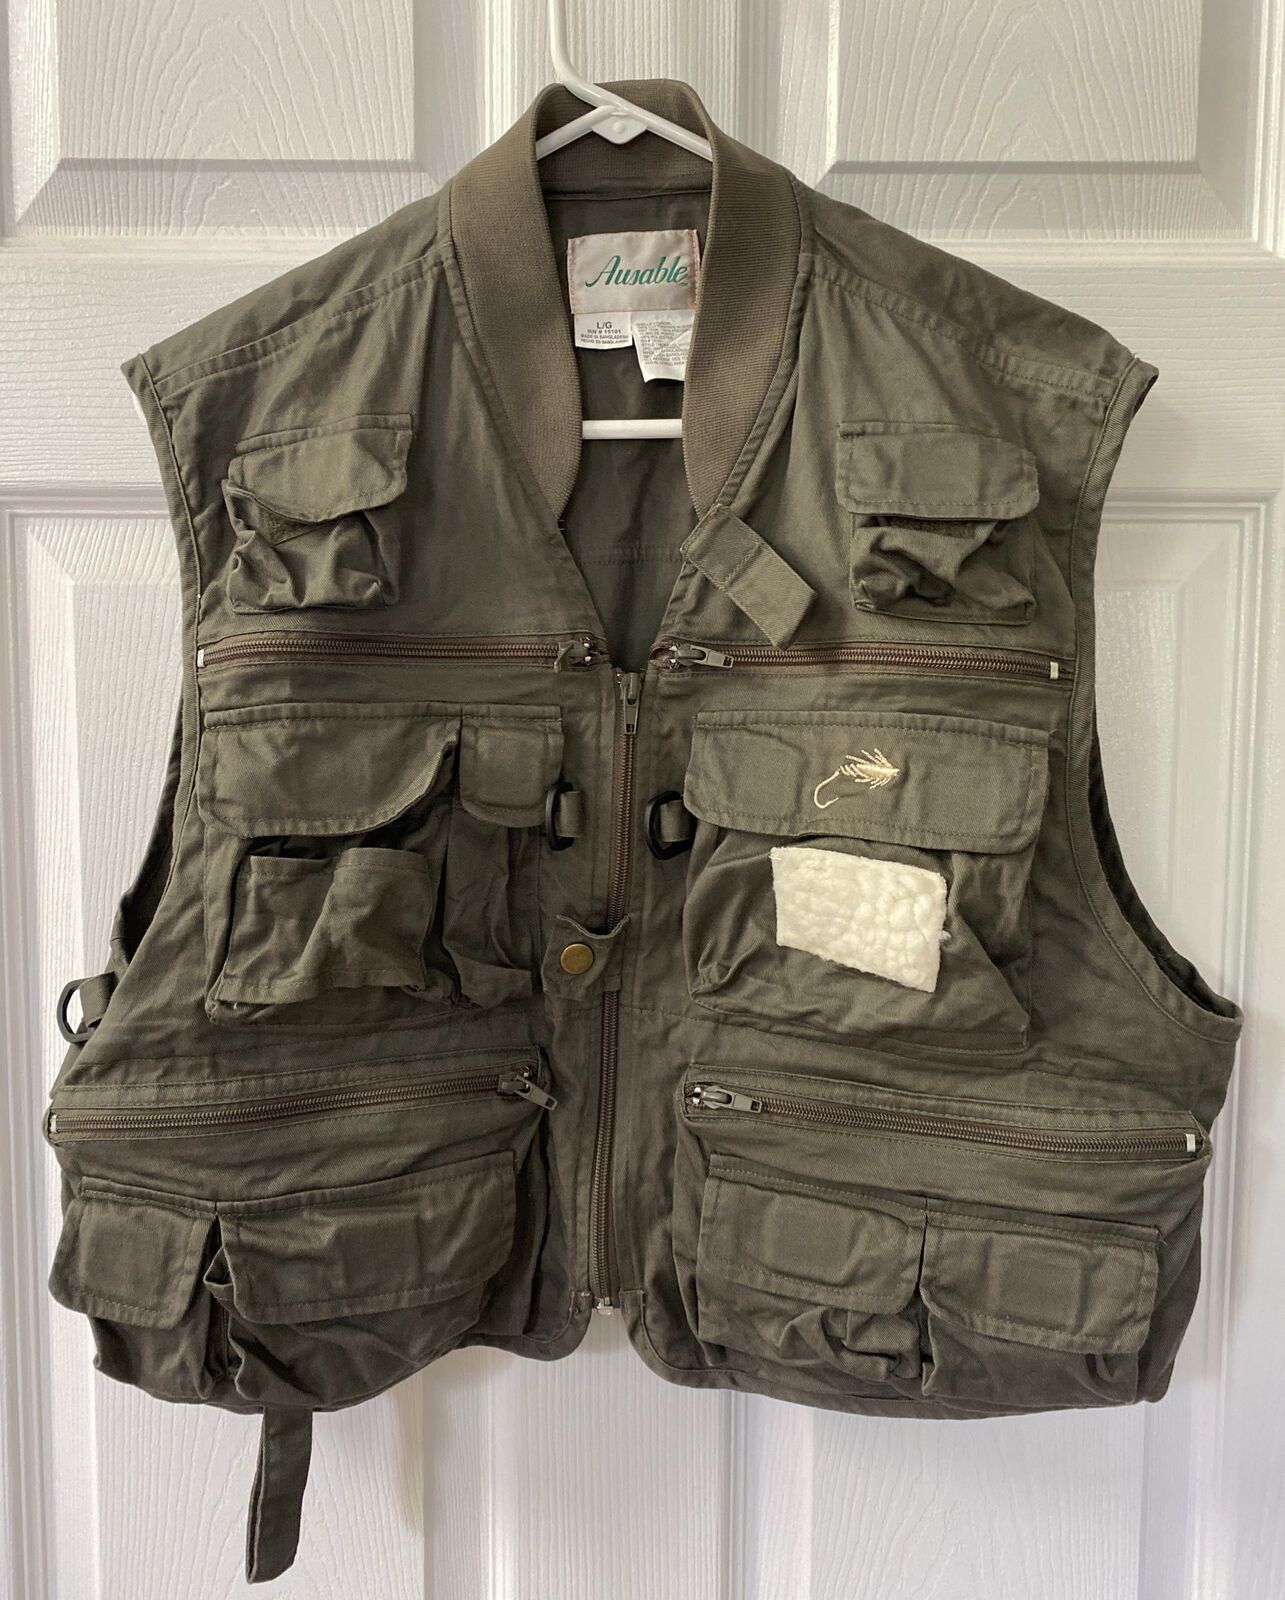 23 Pockets AUSABLE FISHING VEST Fishing For Sales 1 year warranty for sale Weather Green Warmer